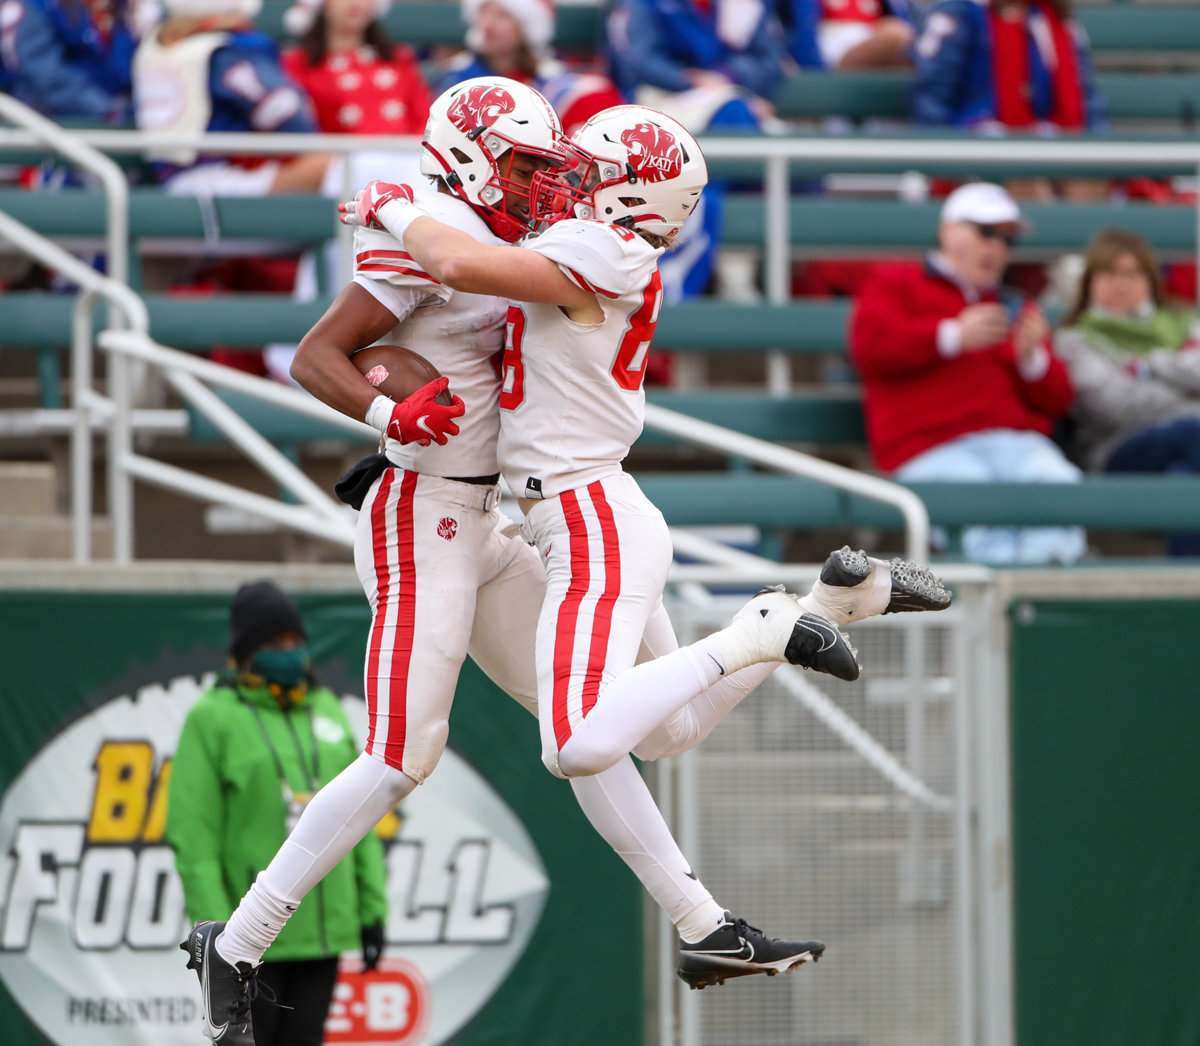 Katy Tigers wide receiver Nic Anderson (4) and tight end Michael Dante (88) celebrate after a touchdown during the Class 6A Division II state semifinal  game between Katy and Westlake on December 11, 2021 in Waco, Texas.